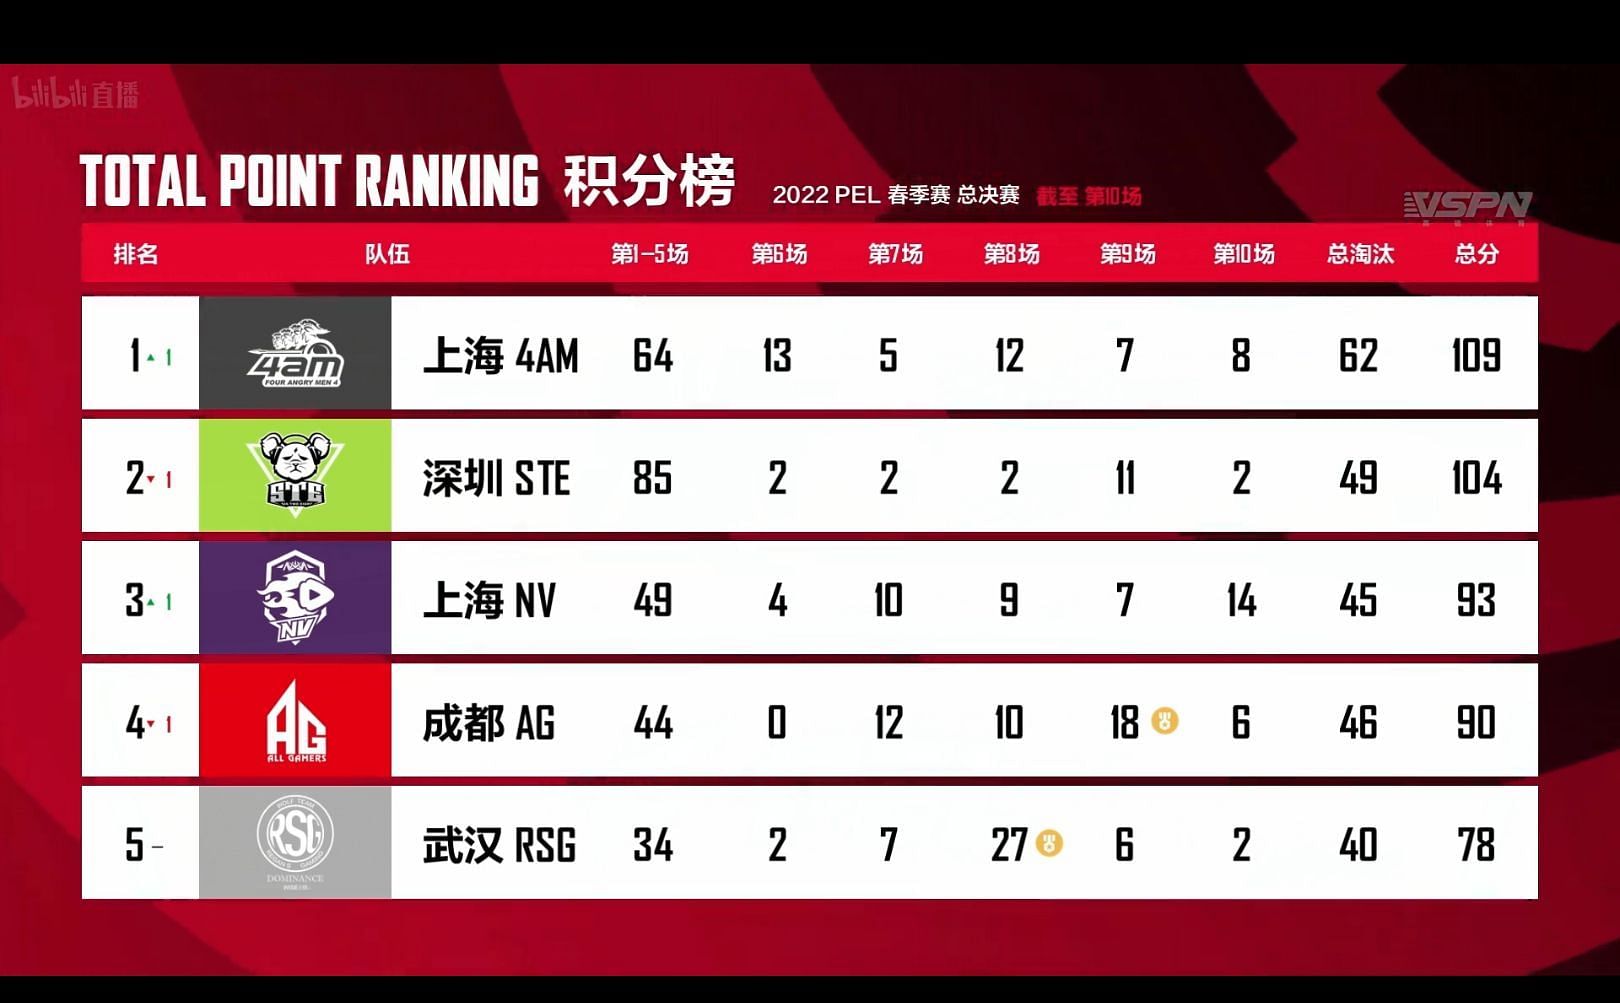 Nova Esports finished in third place after PEL Finals Day 2 (Image via Tencent)